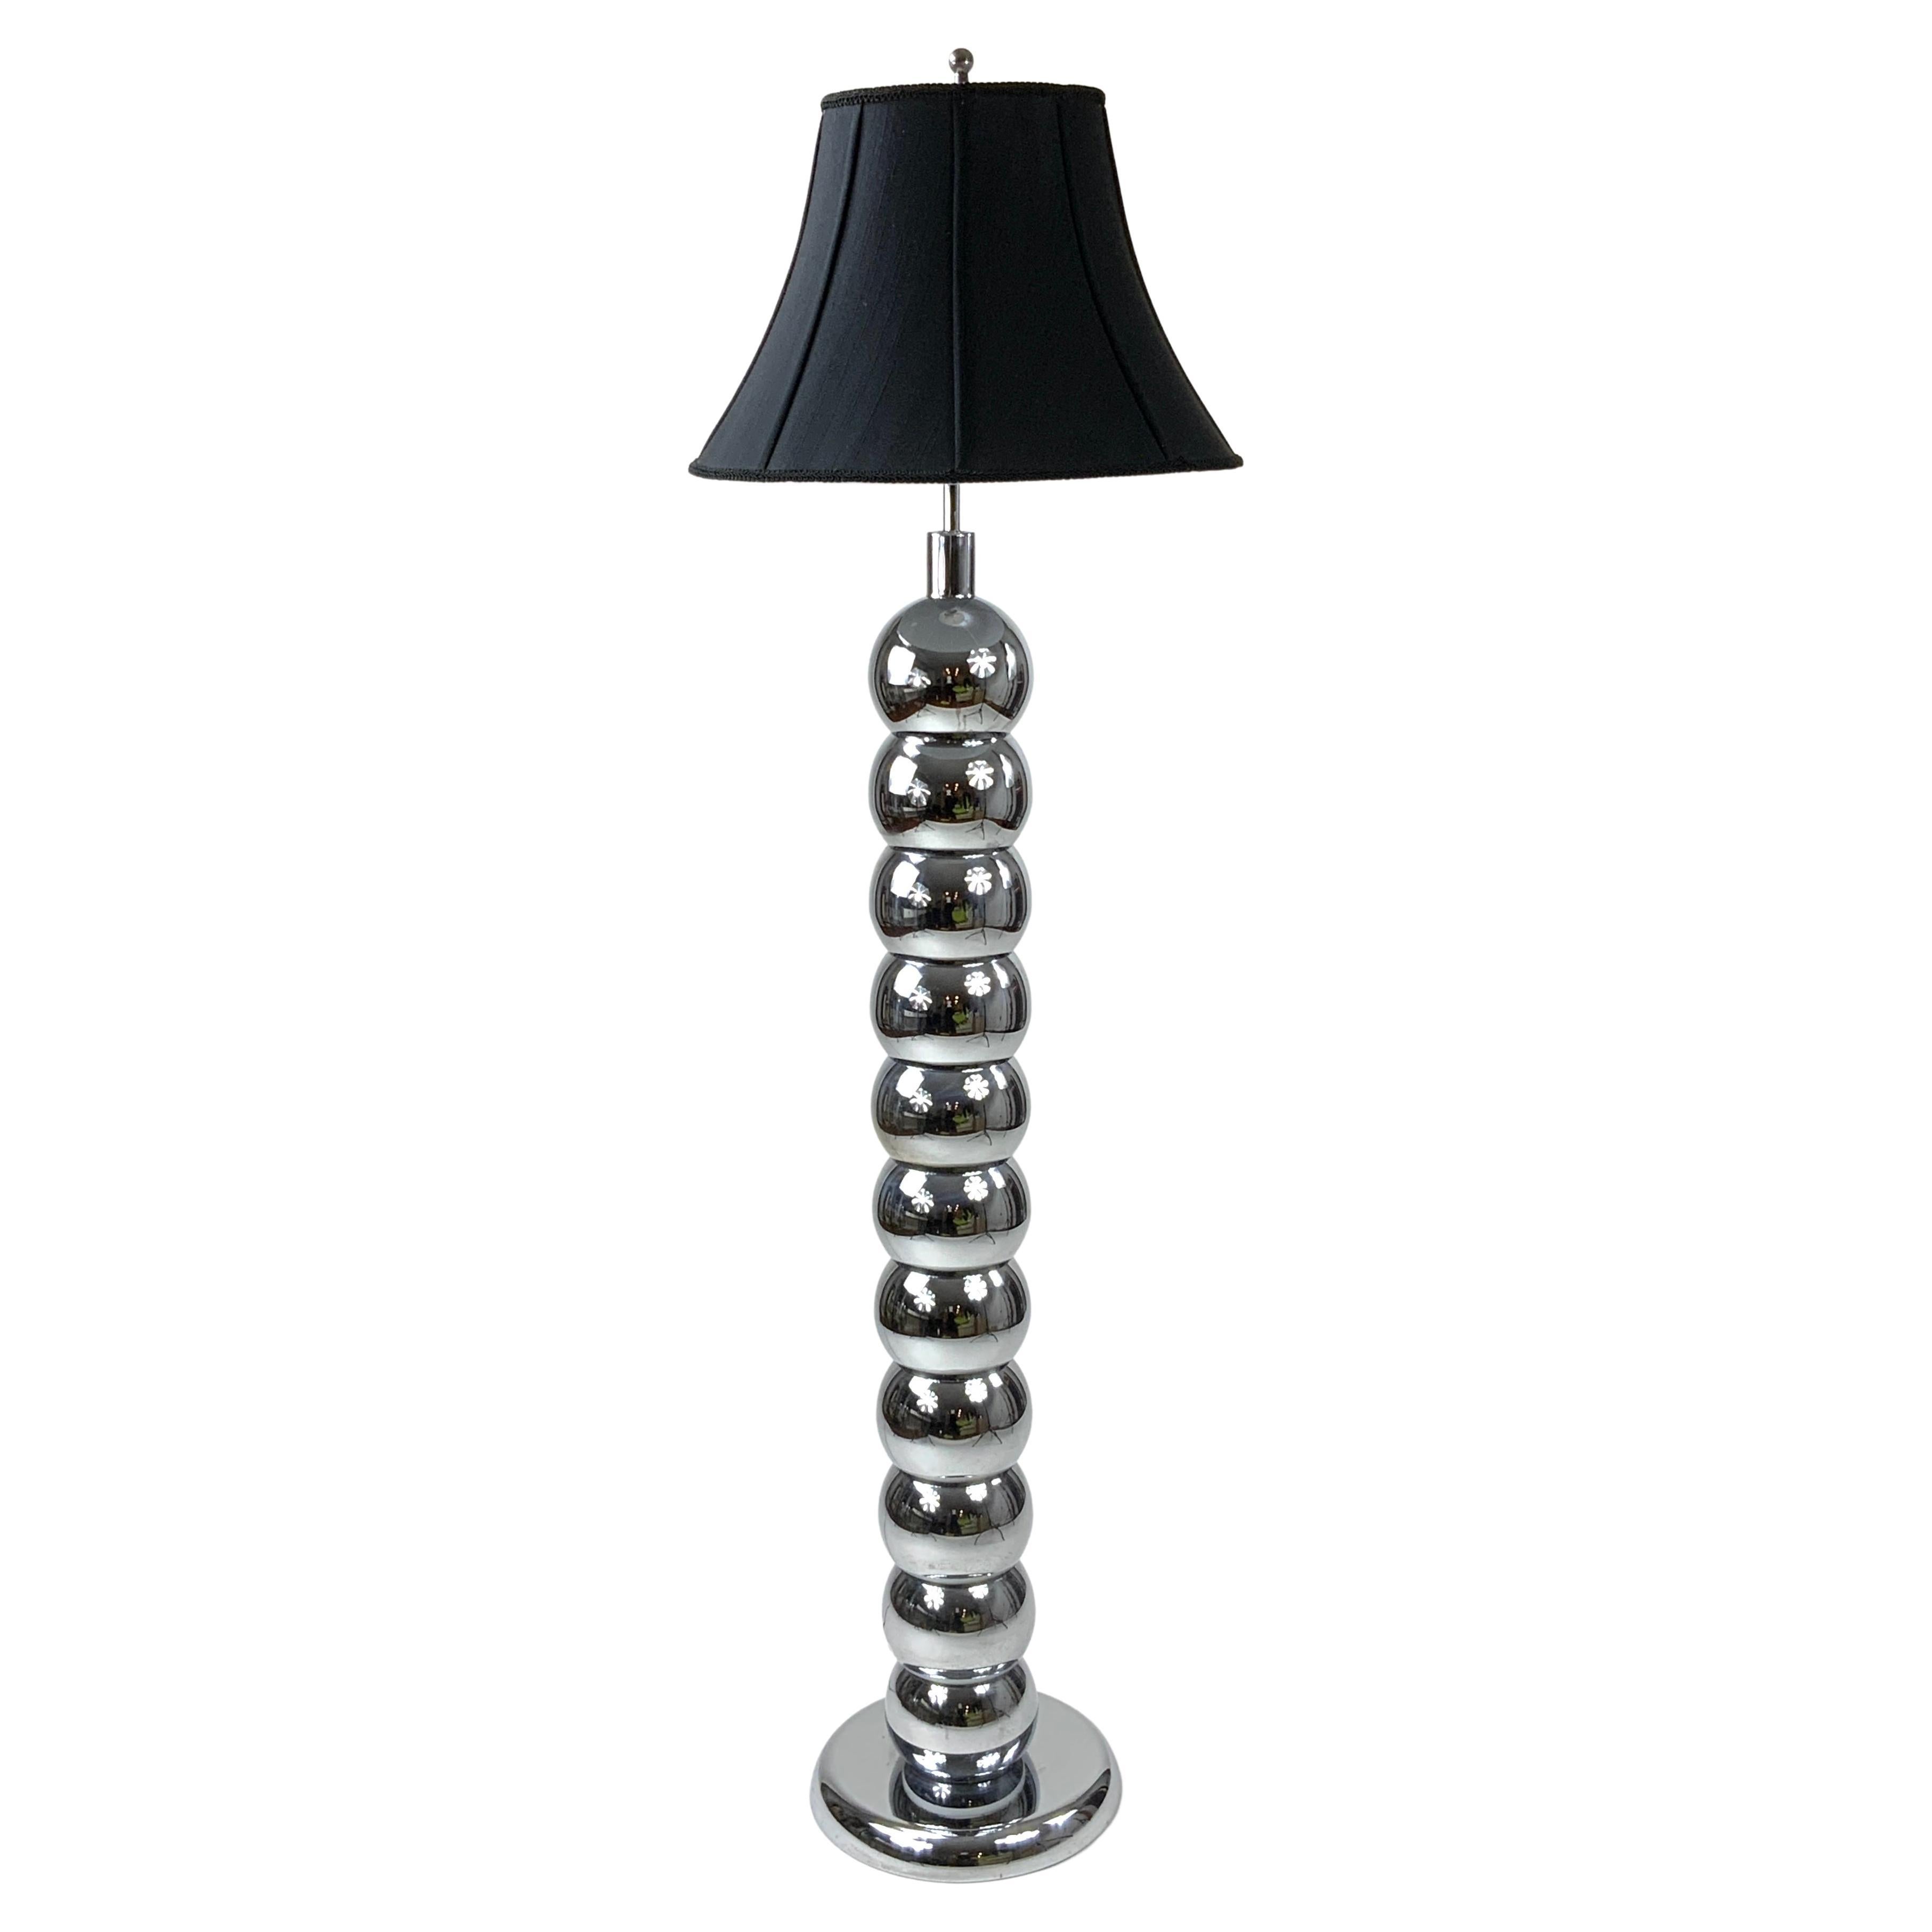 Vintage George Kovacs Stacked Chrome Ball Floor Lamp, 1970’s For Sale